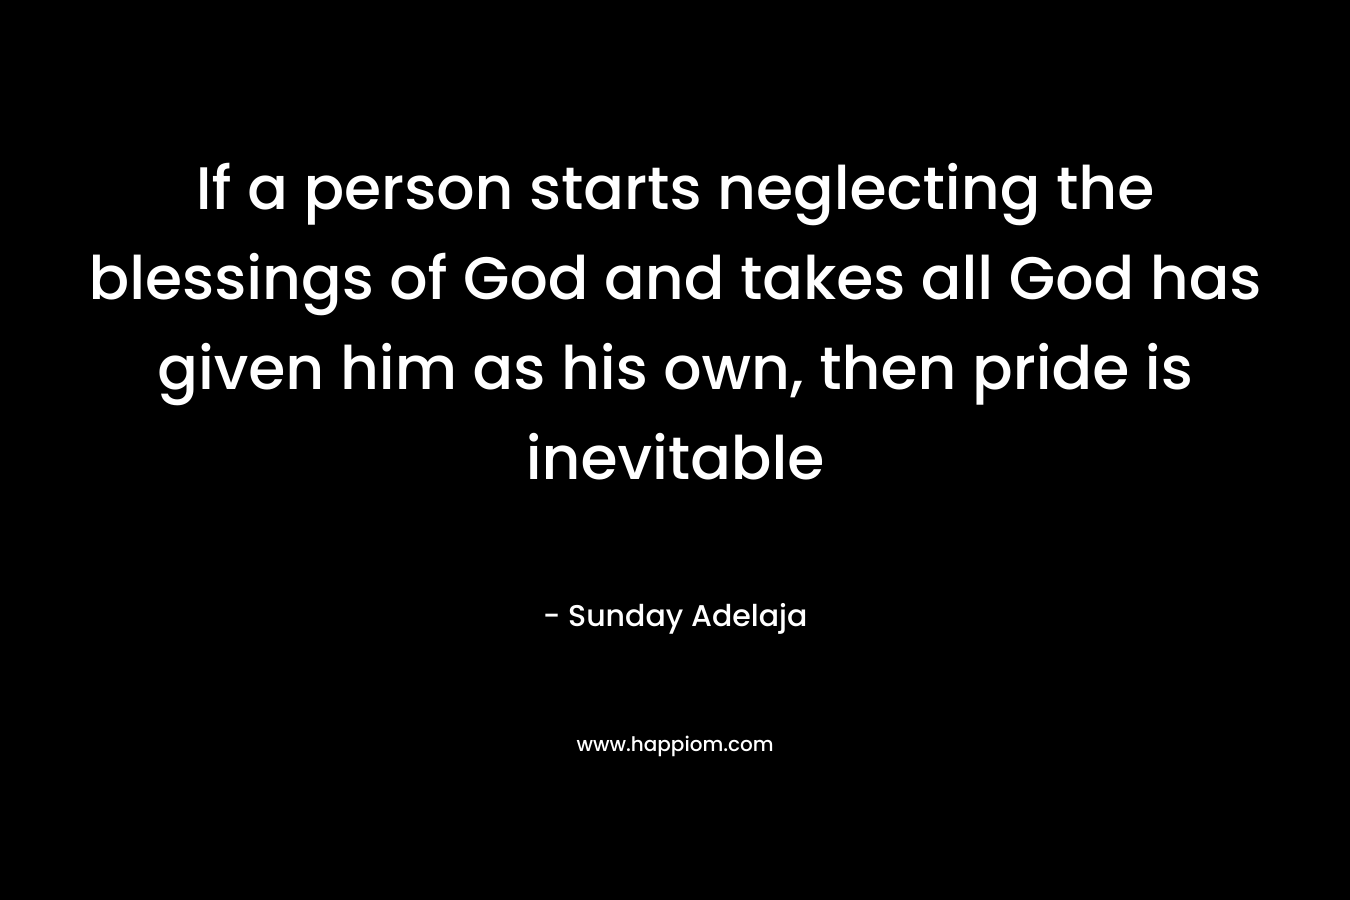 If a person starts neglecting the blessings of God and takes all God has given him as his own, then pride is inevitable